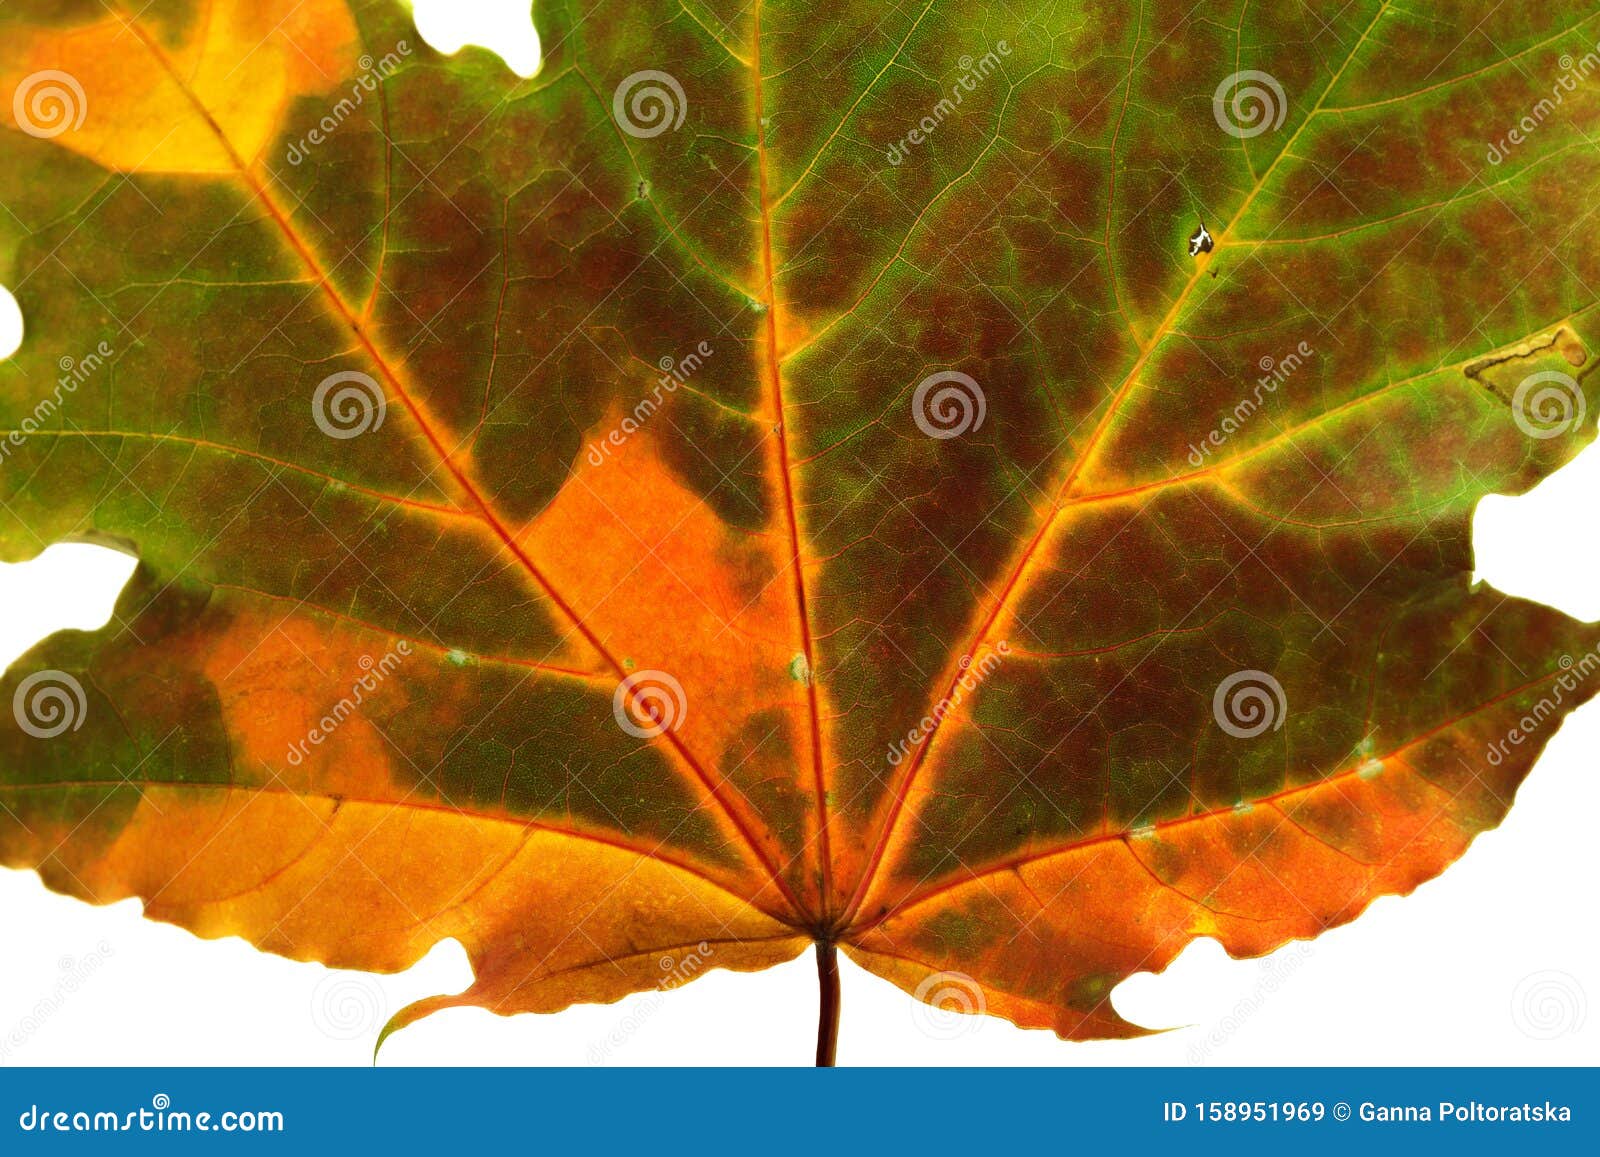 Autumn Multicolored Maple Leaf. Close-up View Stock Image - Image of